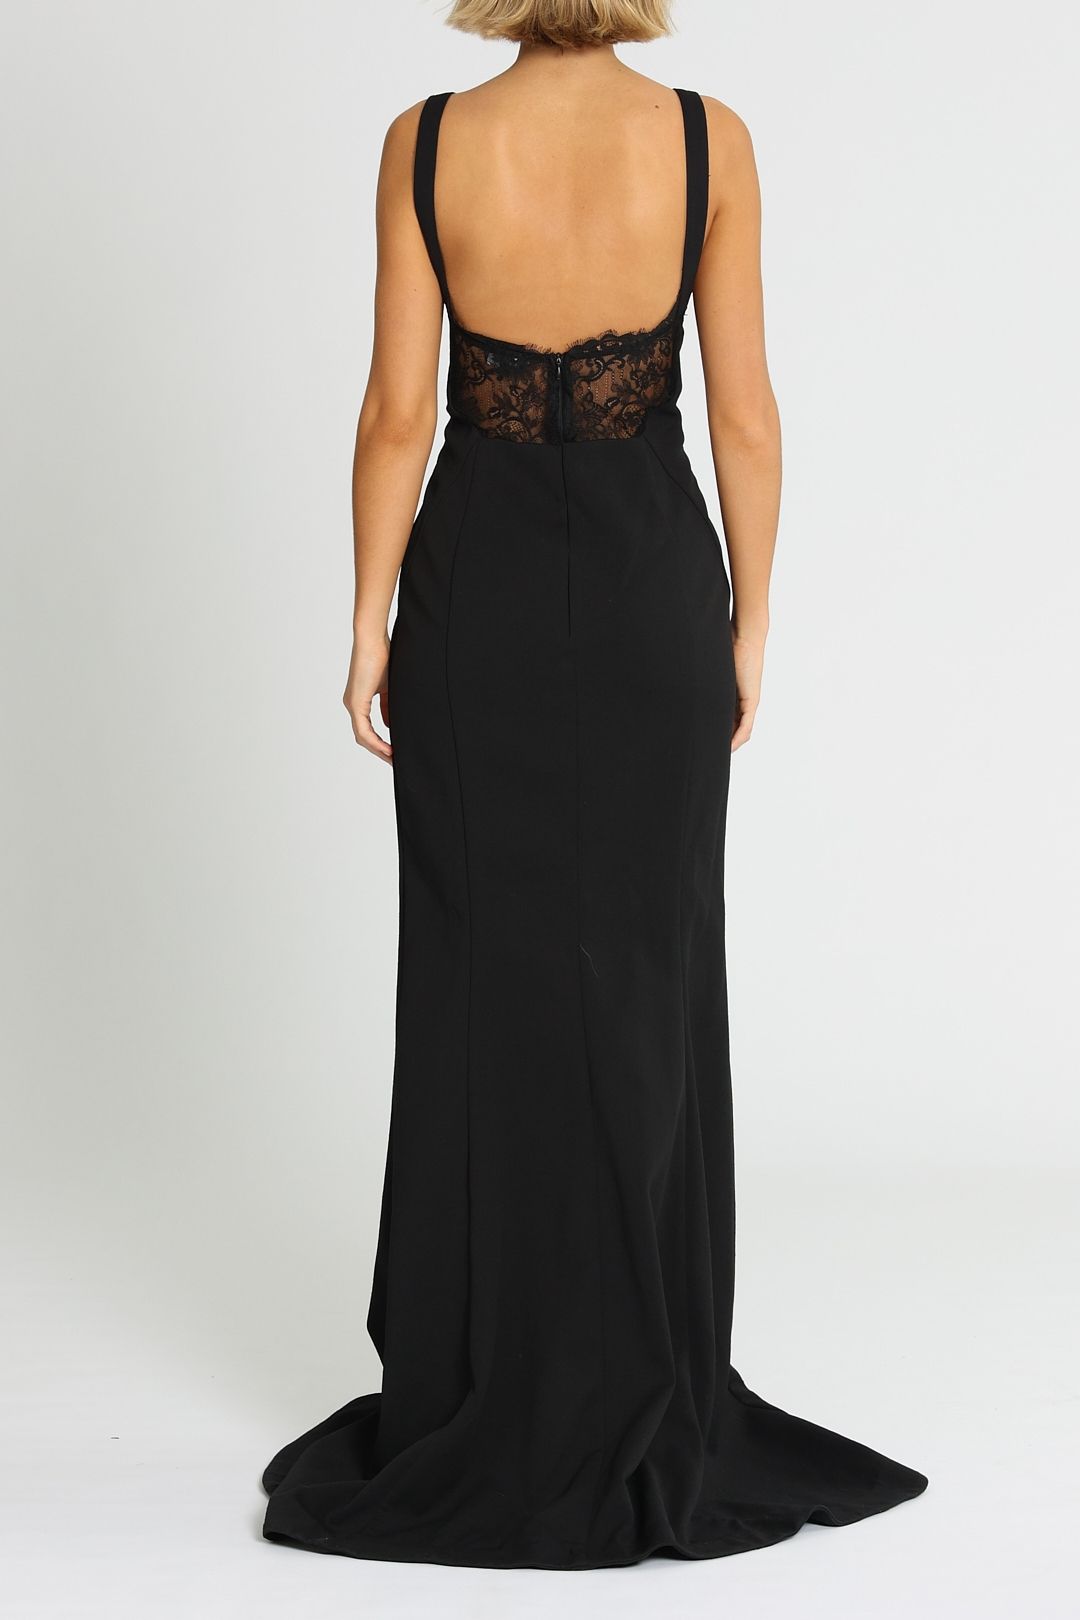 Grace and Hart Calliope Gown Black Lace